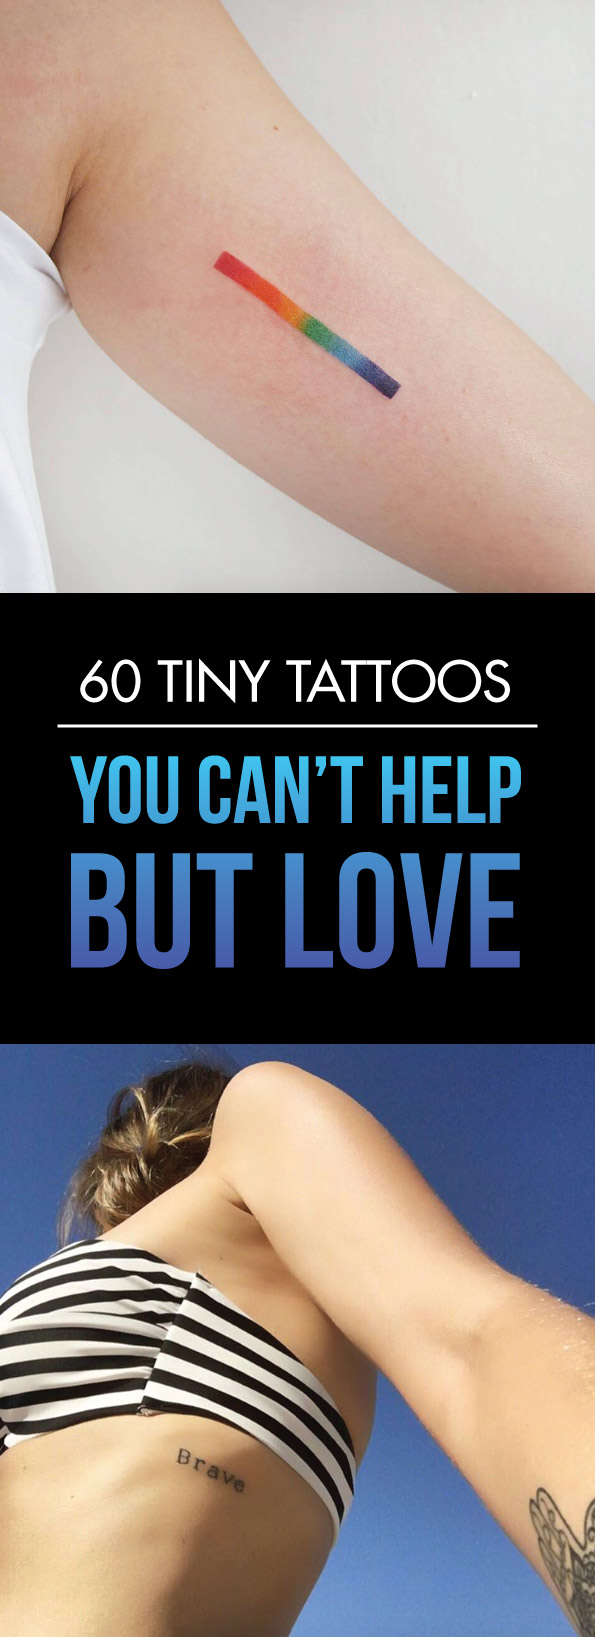 60 Tiny Tattoos You Can't Help But Love | TattooBlend